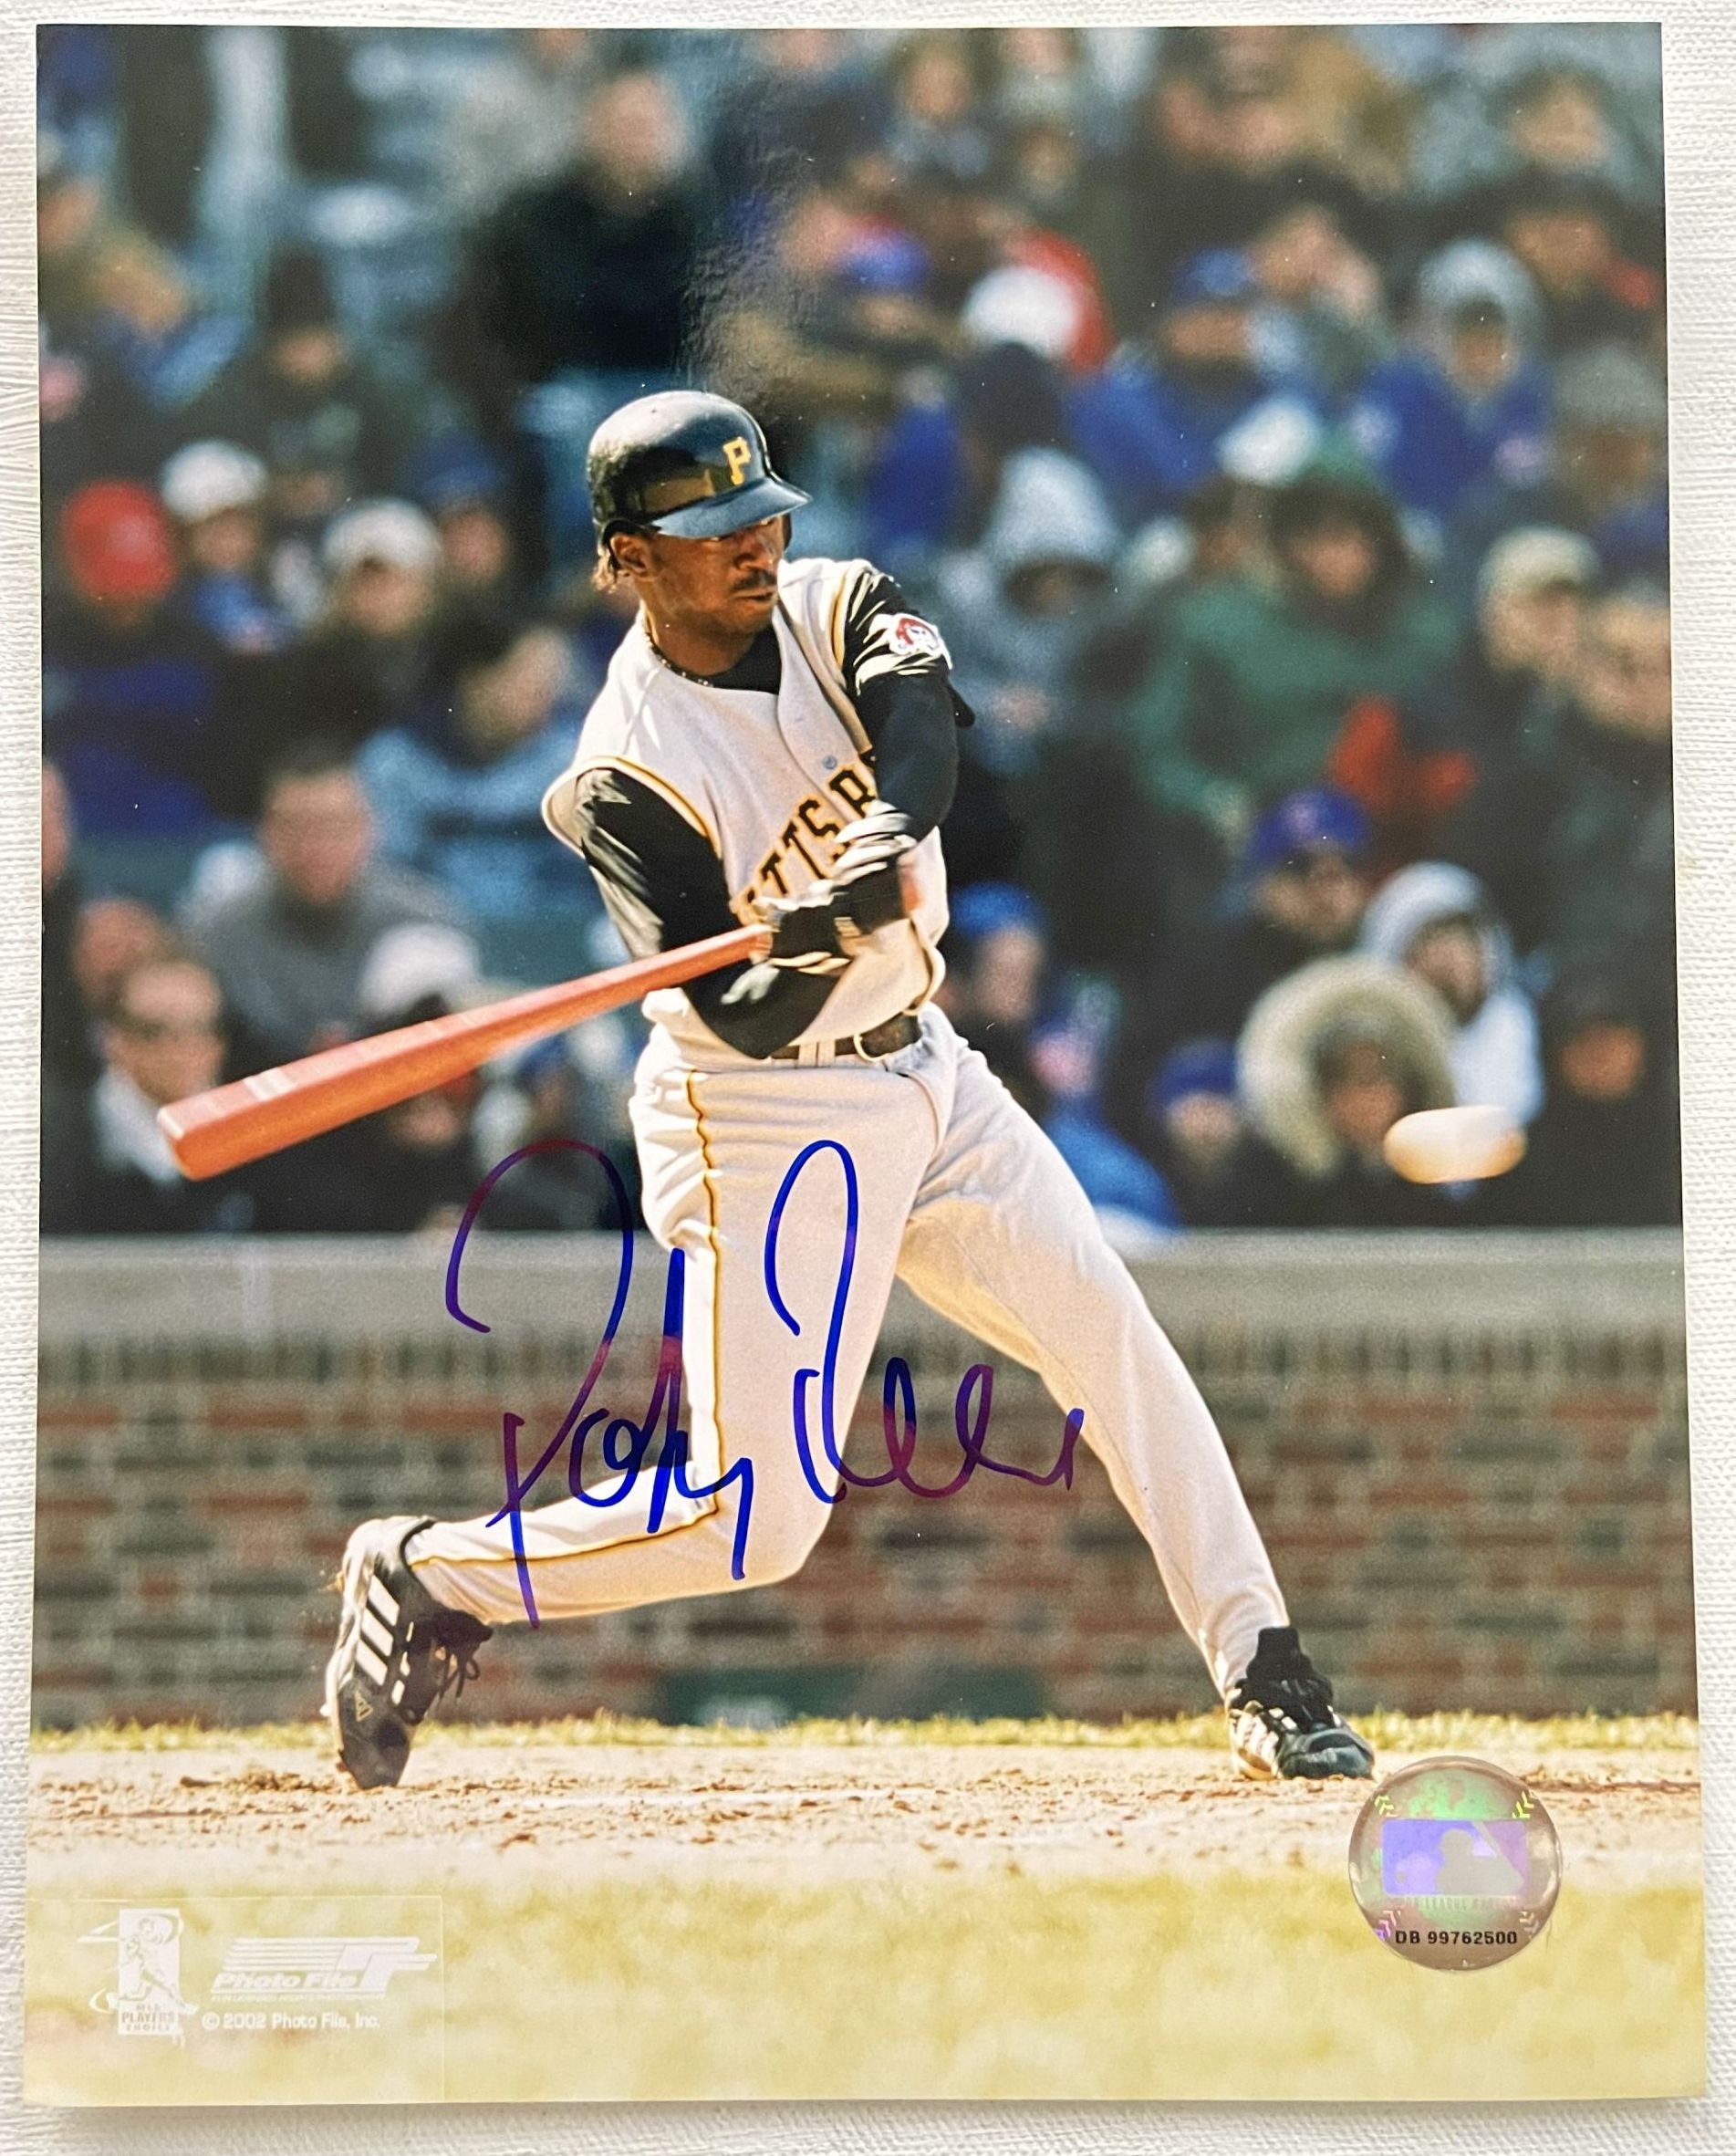 Pokey Reese Signed Autographed Glossy 8x10 Photo Pittsburgh 